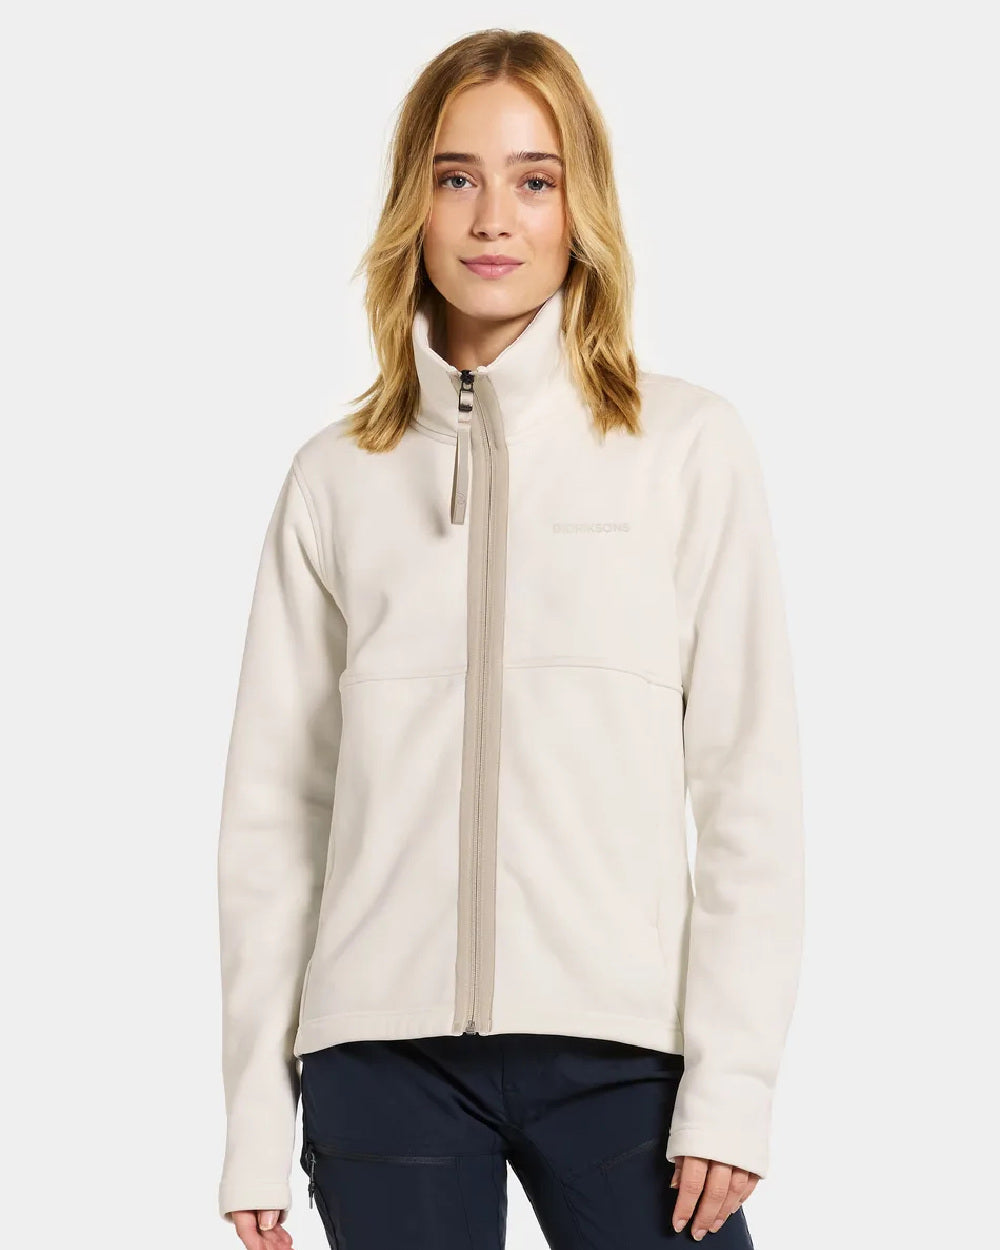 White Foam Coloured Didriksons Leah Womens Fullzip On A Grey Background 